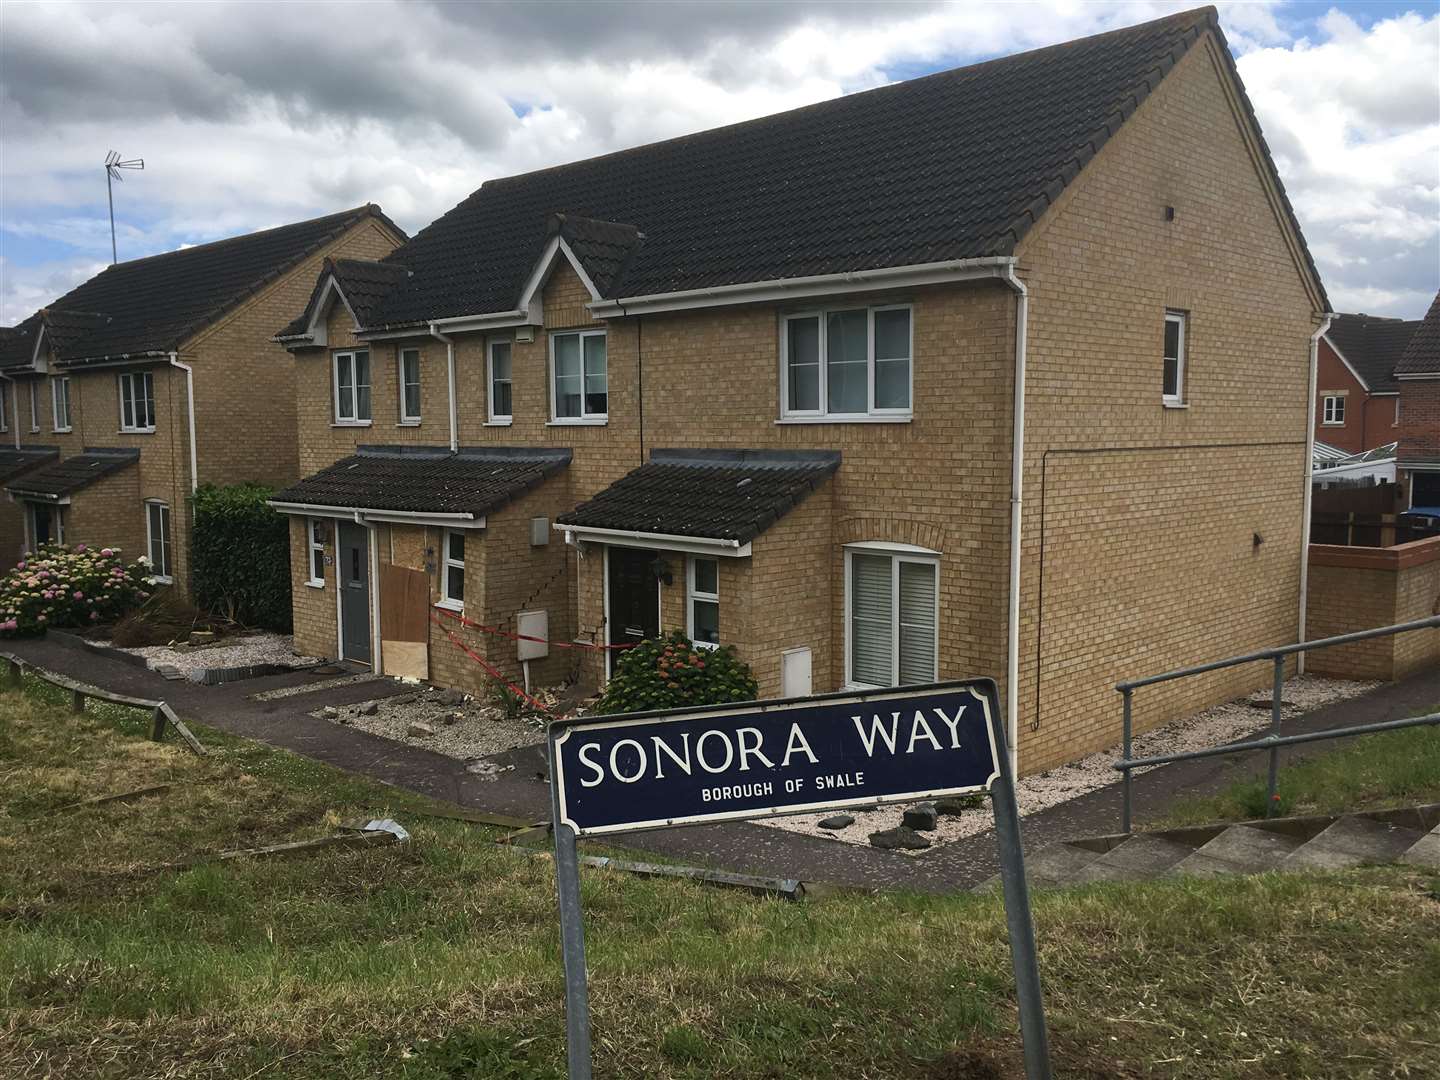 A Vauxhall Astra car crashed into these houses in Quinton Road at the junction of Sonora Way in Sittingbourne (12397874)